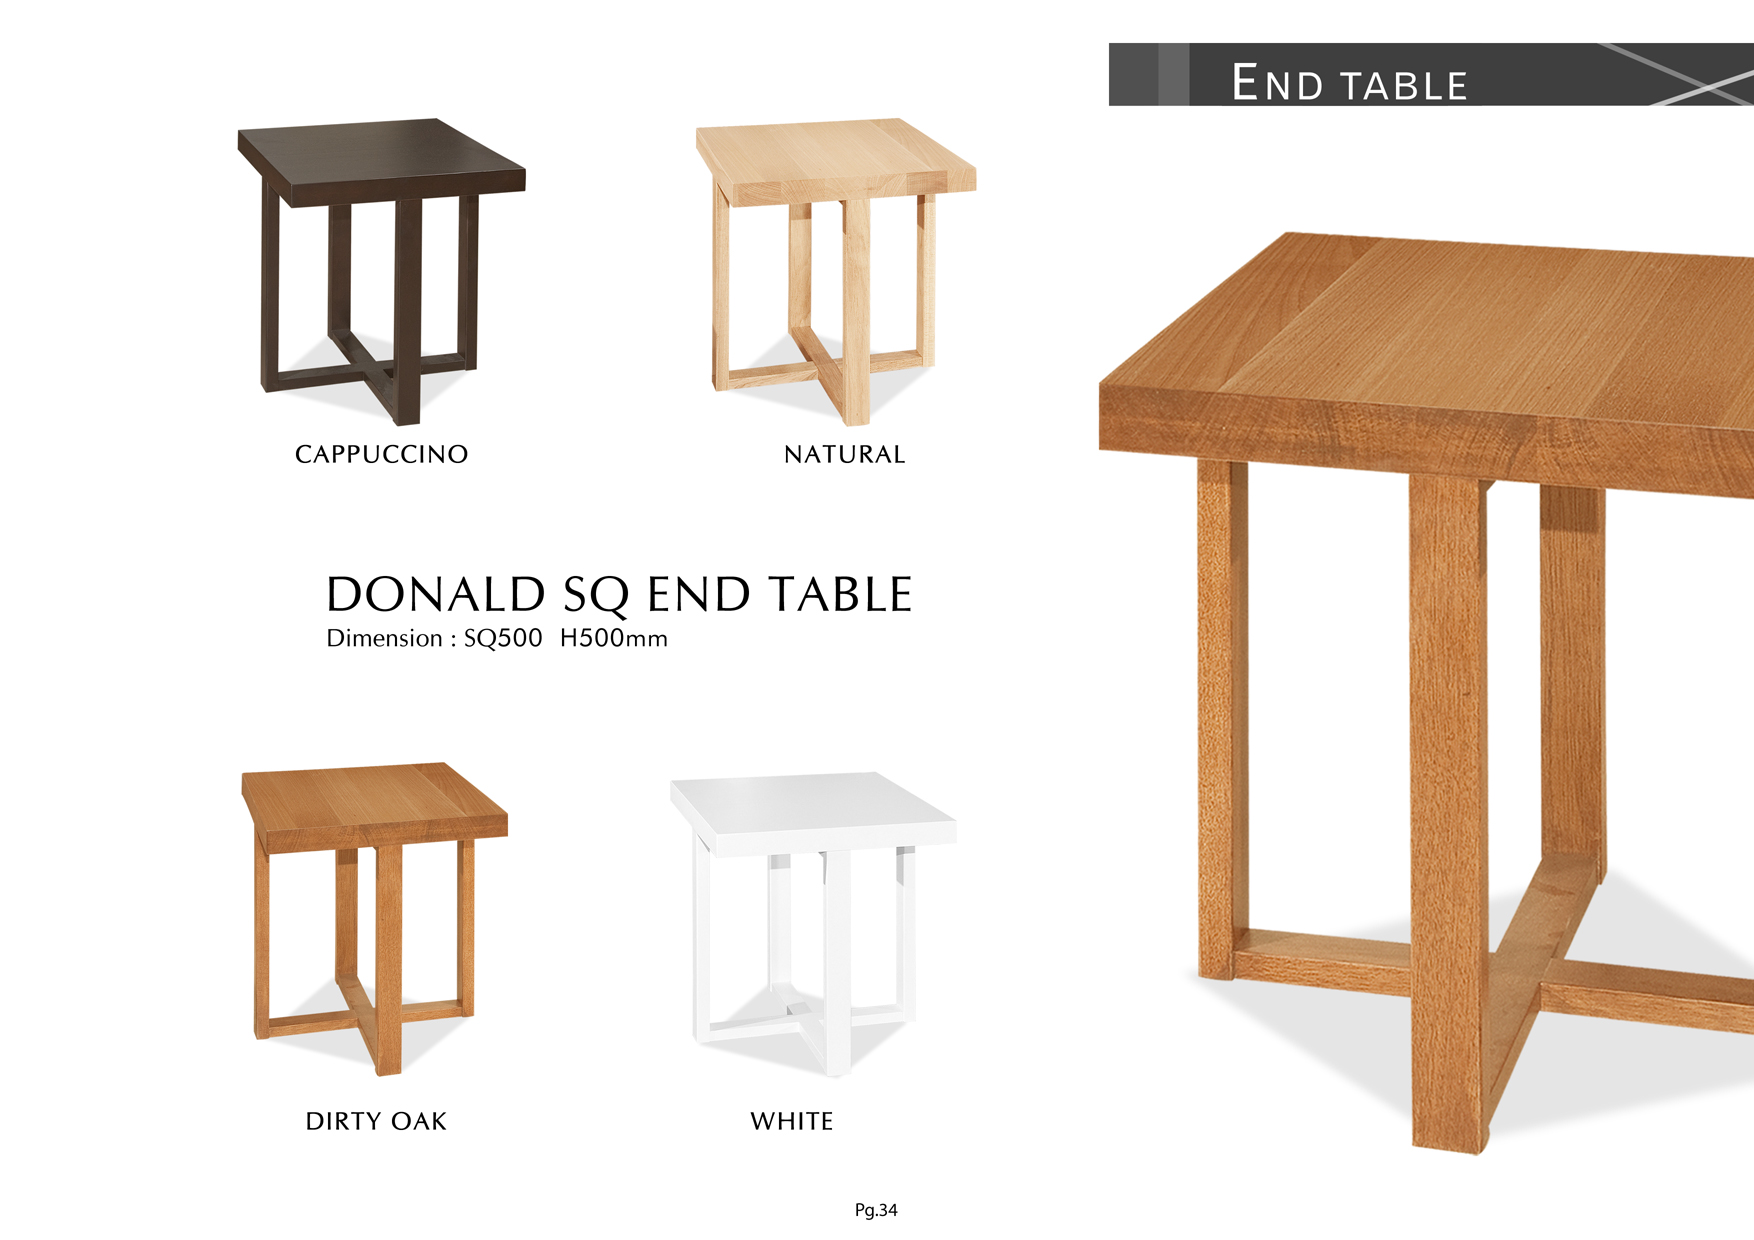 Product: PG34. DONALD SQUARE END TABLE